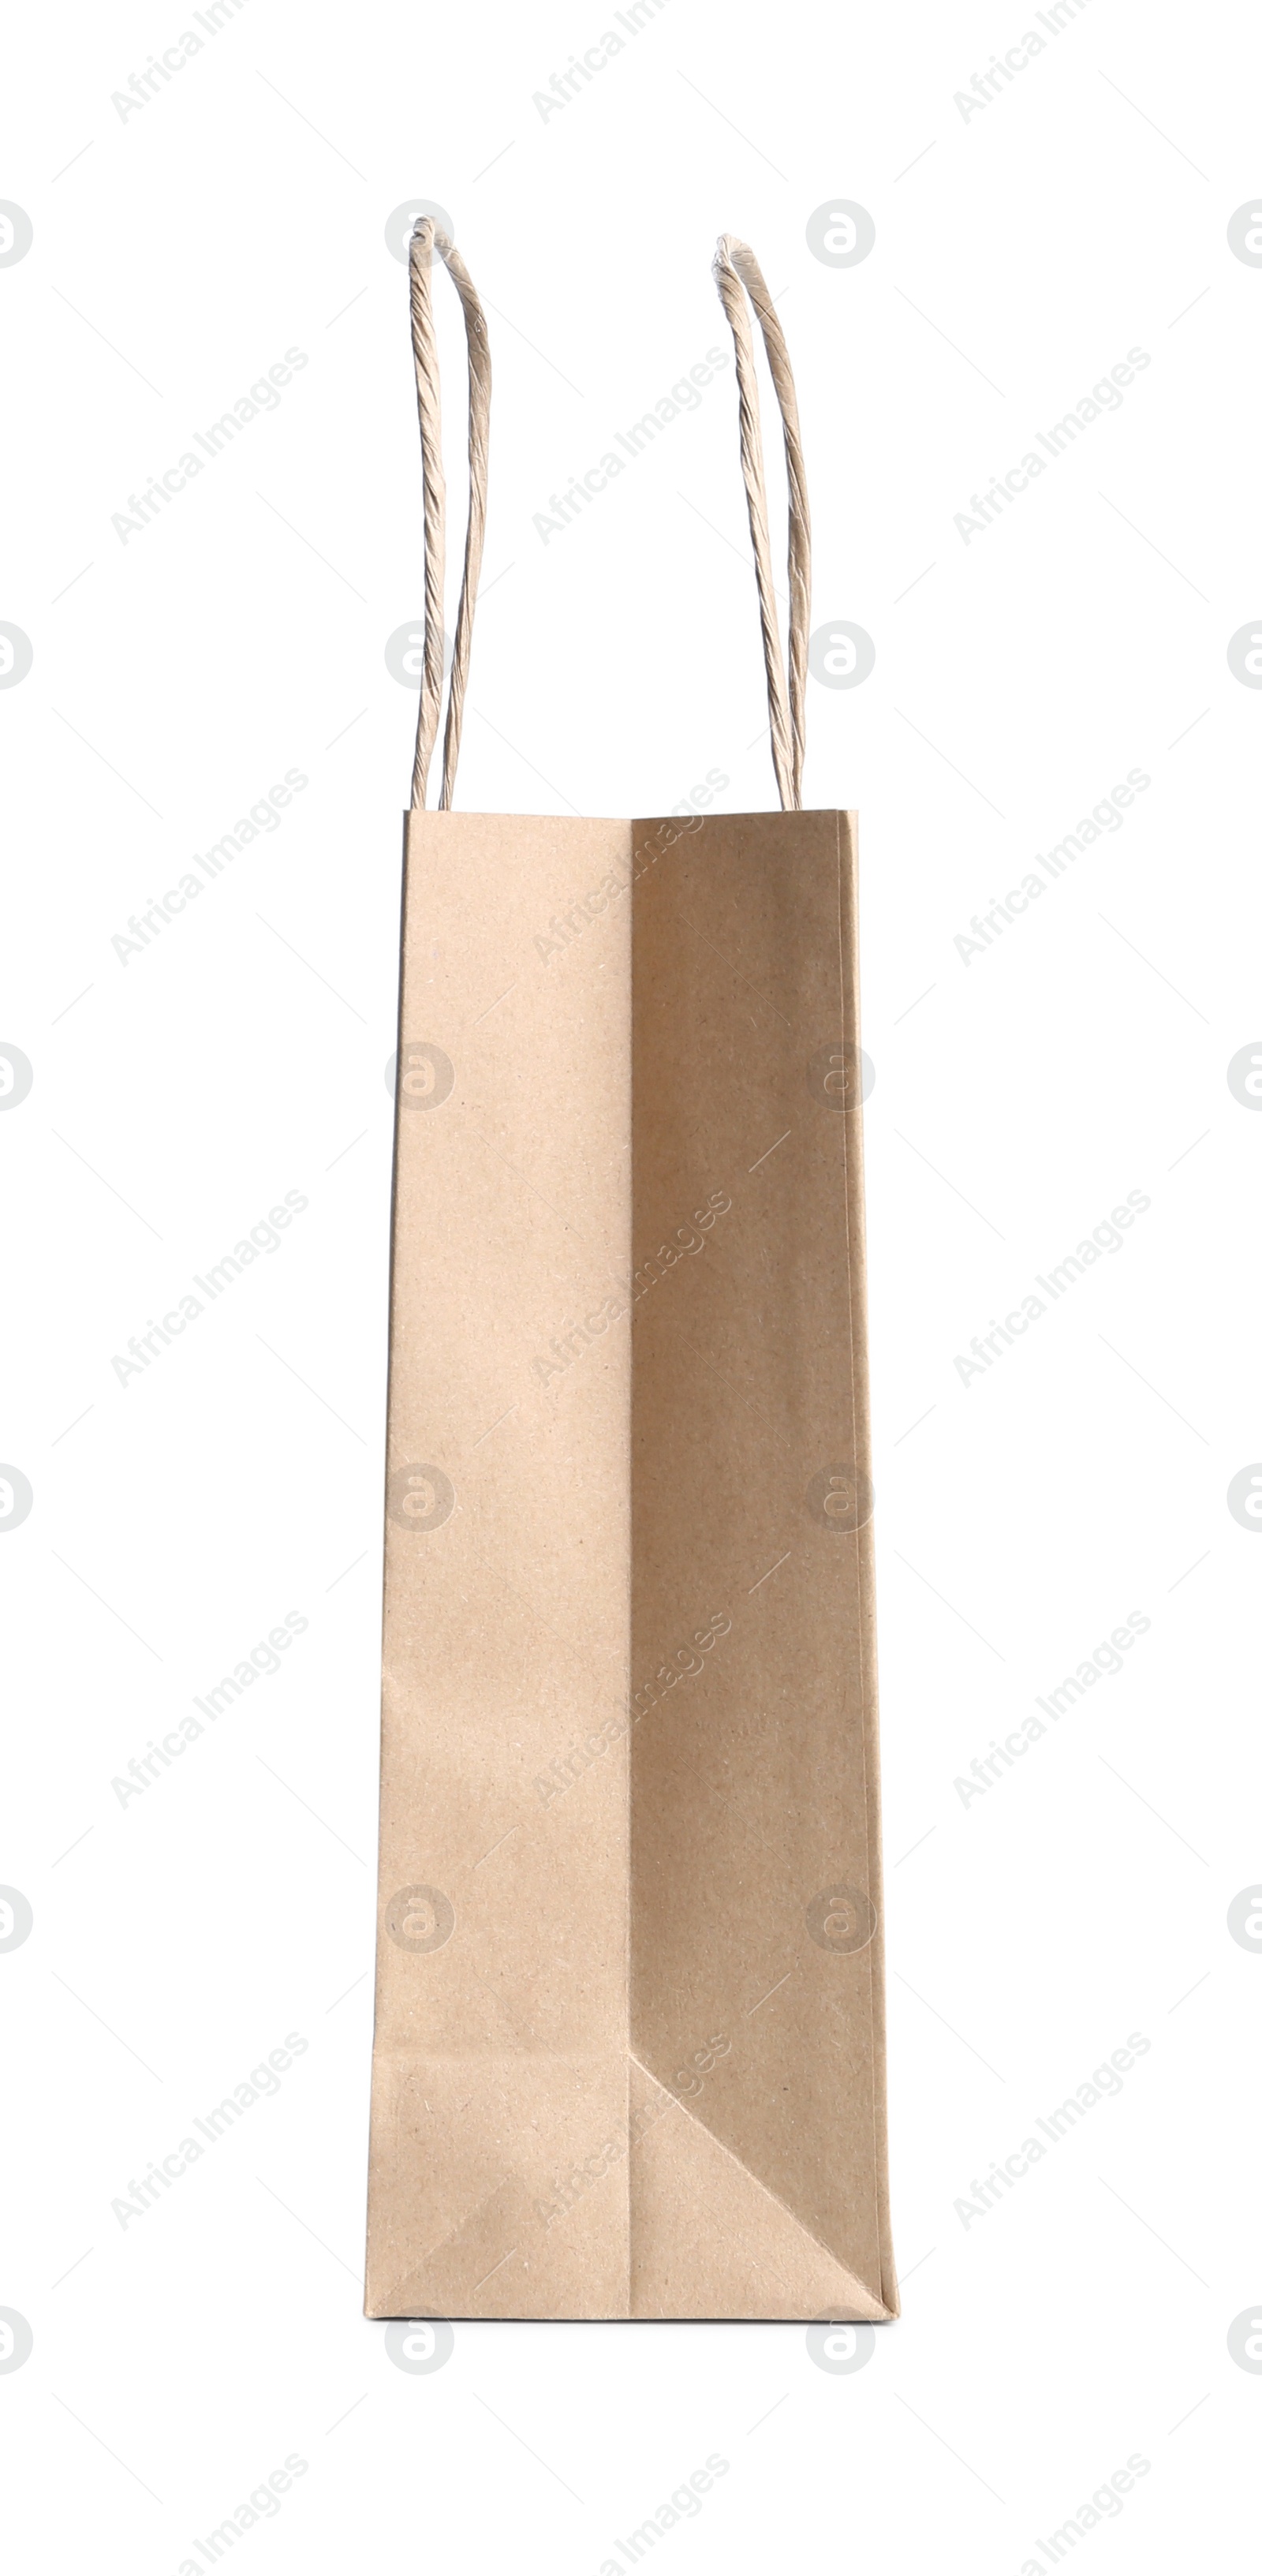 Photo of One kraft paper bag isolated on white. Mockup for design